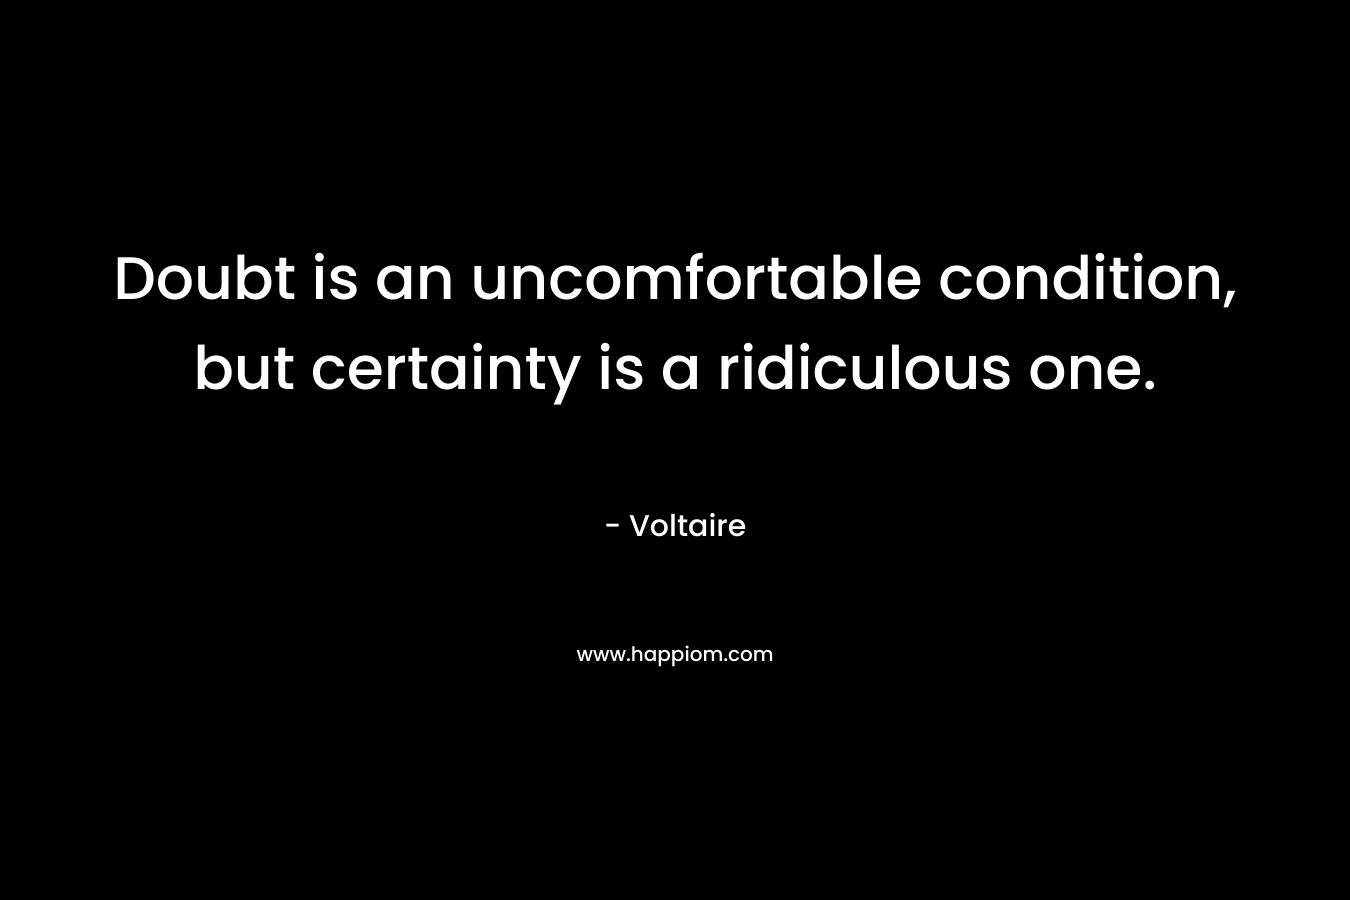 Doubt is an uncomfortable condition, but certainty is a ridiculous one. – Voltaire